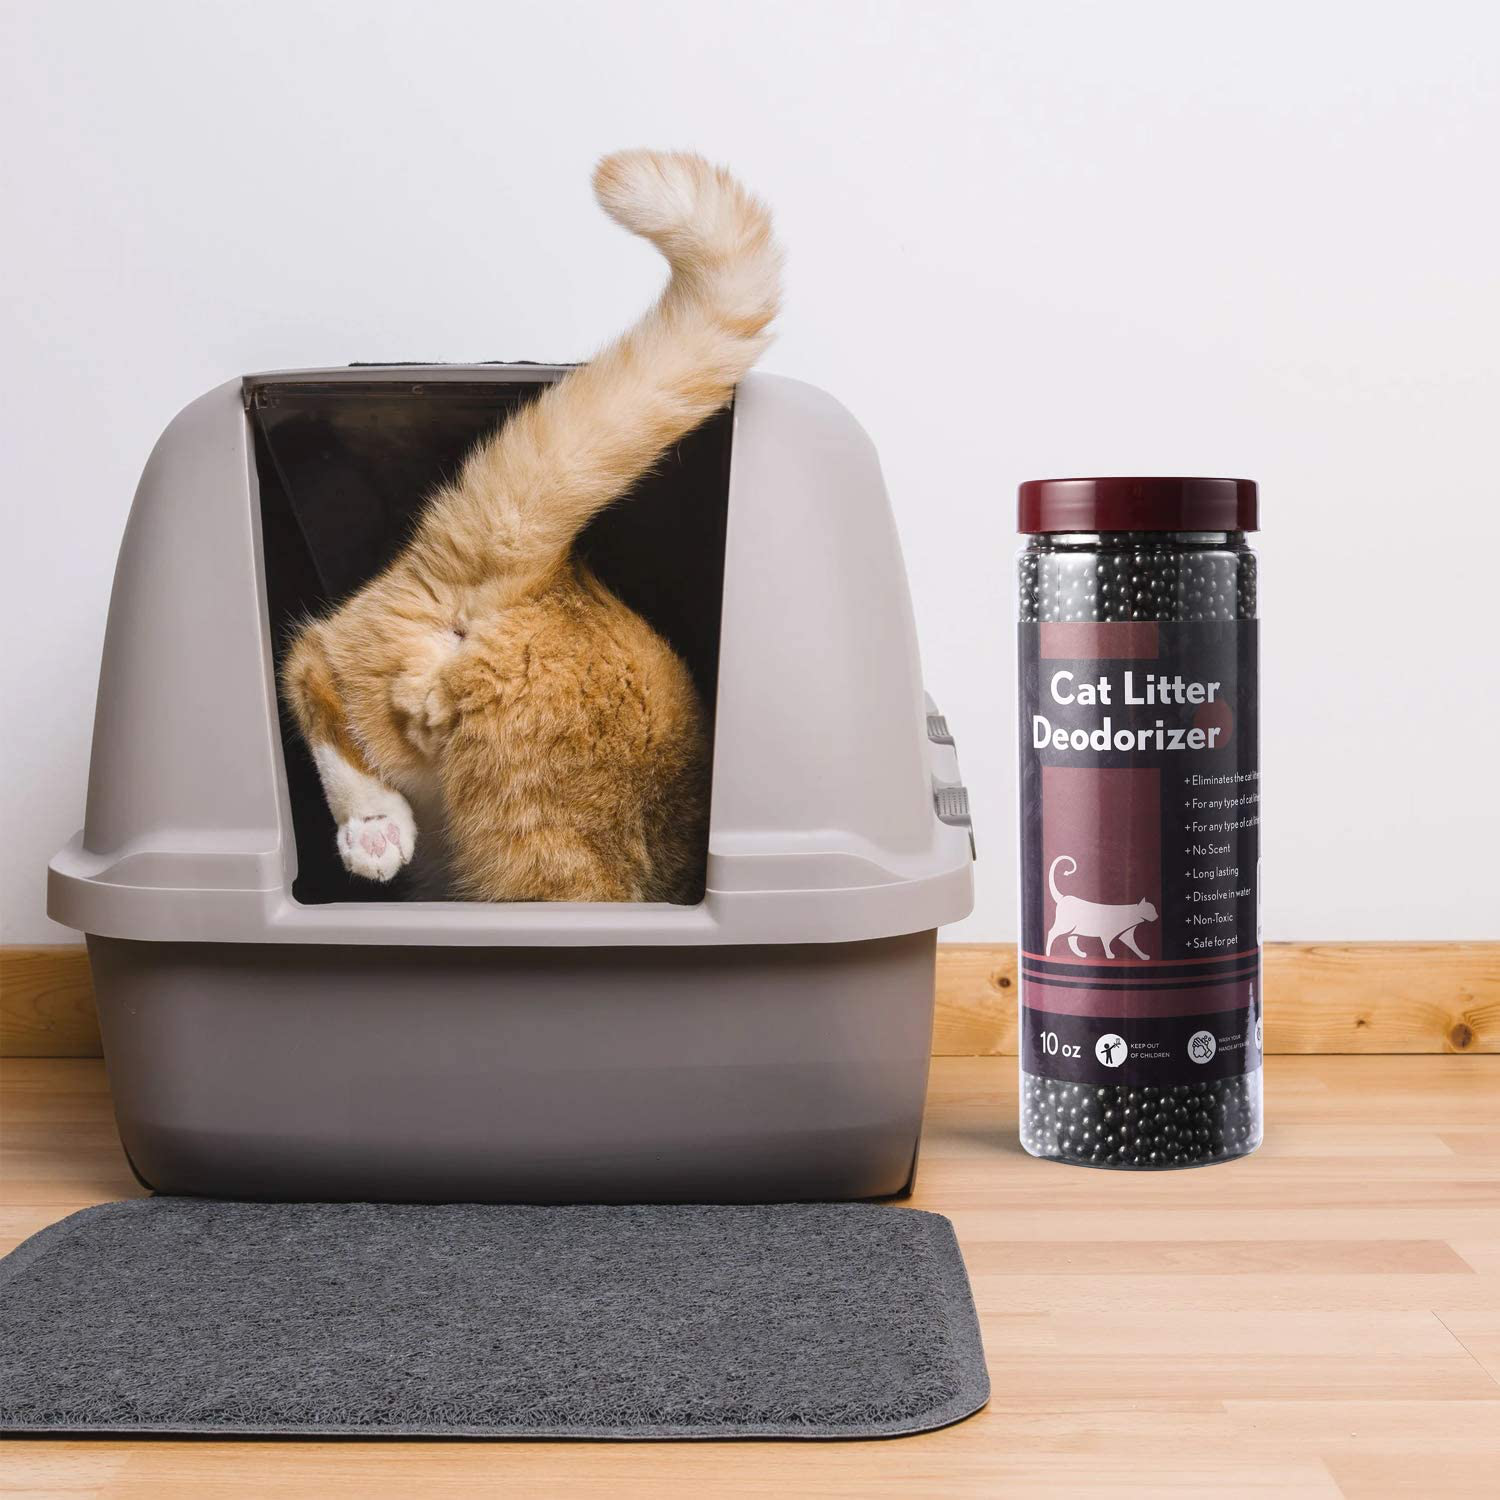 No Scent Cat Litter Deodorizer Litter Box Odor Eliminator Natural Deordizer Kitten Litter Smell Control Safe Litter Deoderizer for Kitty Solid Adsorbents of Minerals&Activated Charcoal 10 Oz Bottle Animals & Pet Supplies > Pet Supplies > Cat Supplies > Cat Litter Box Liners PETNF   